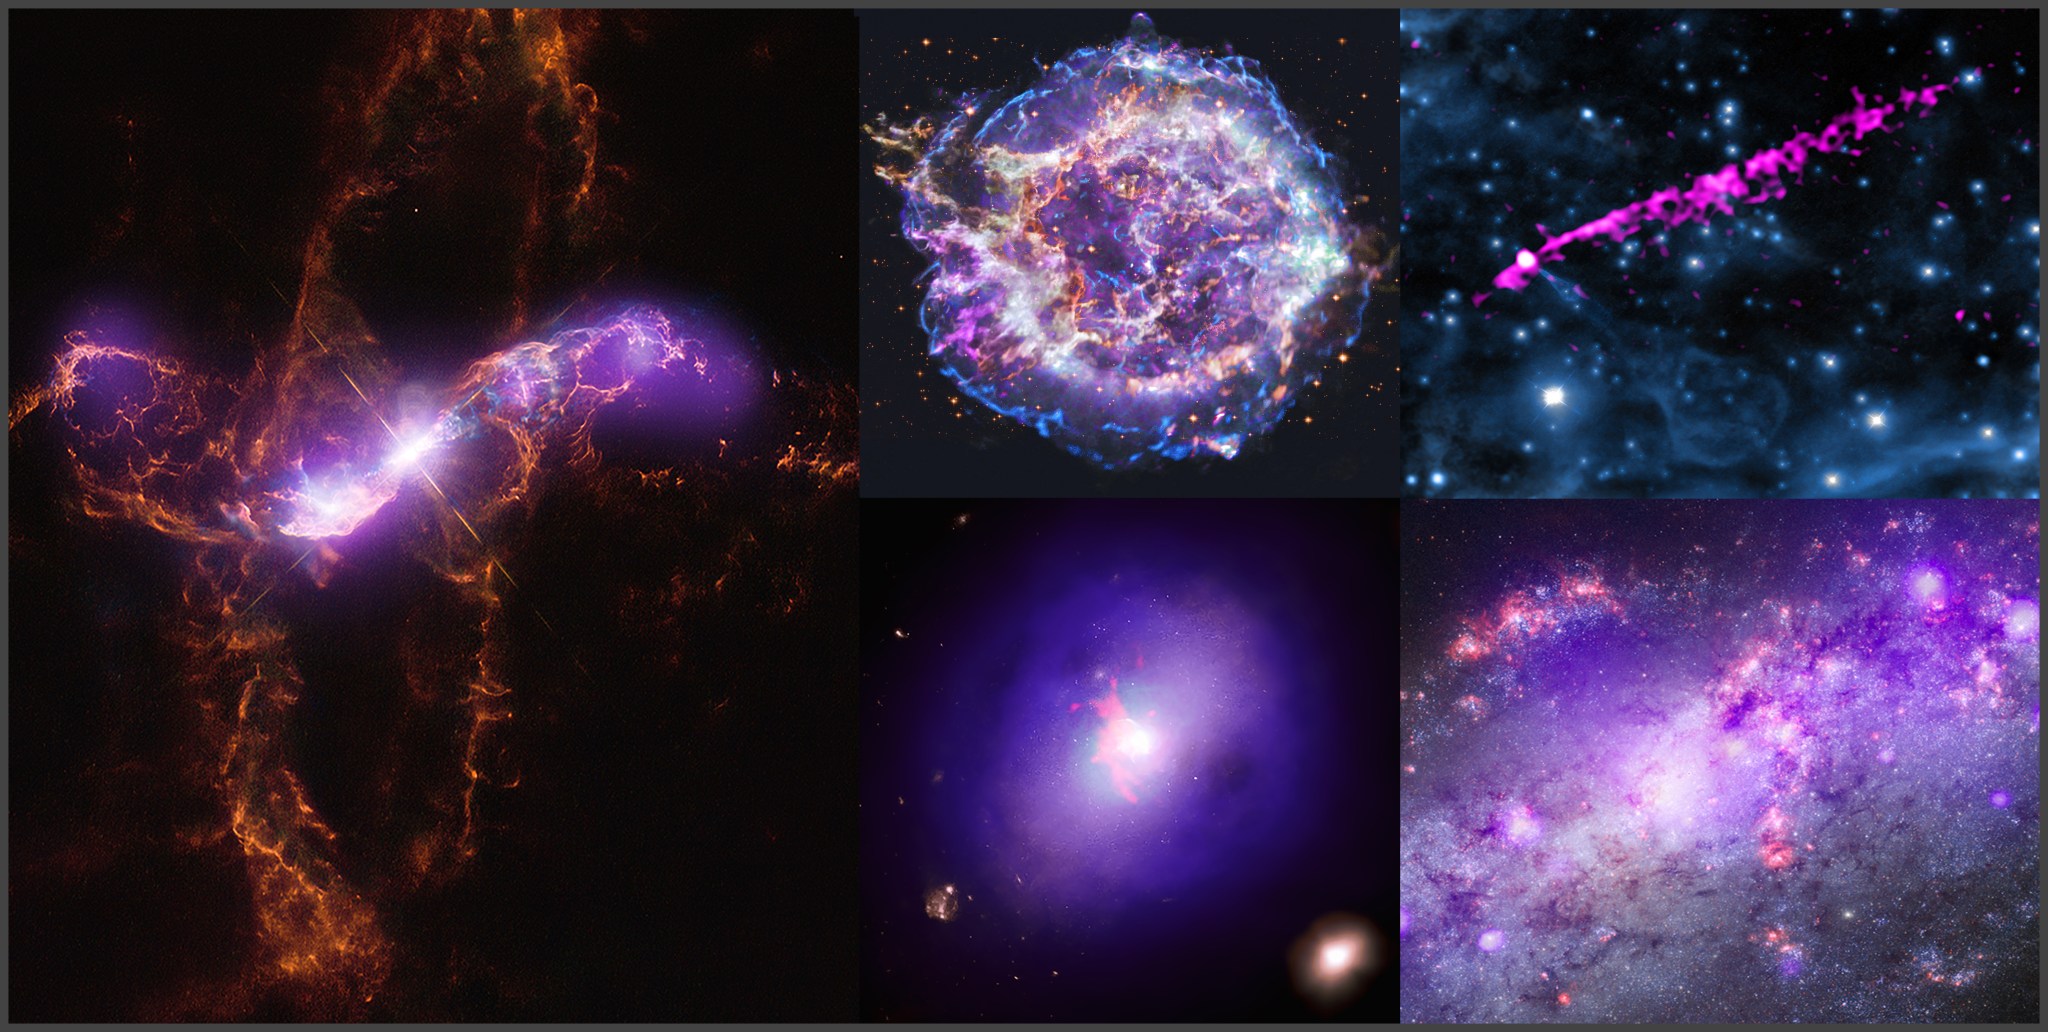 A new gallery of images combining X-ray data from Chandra with those from other telescopes is being released.